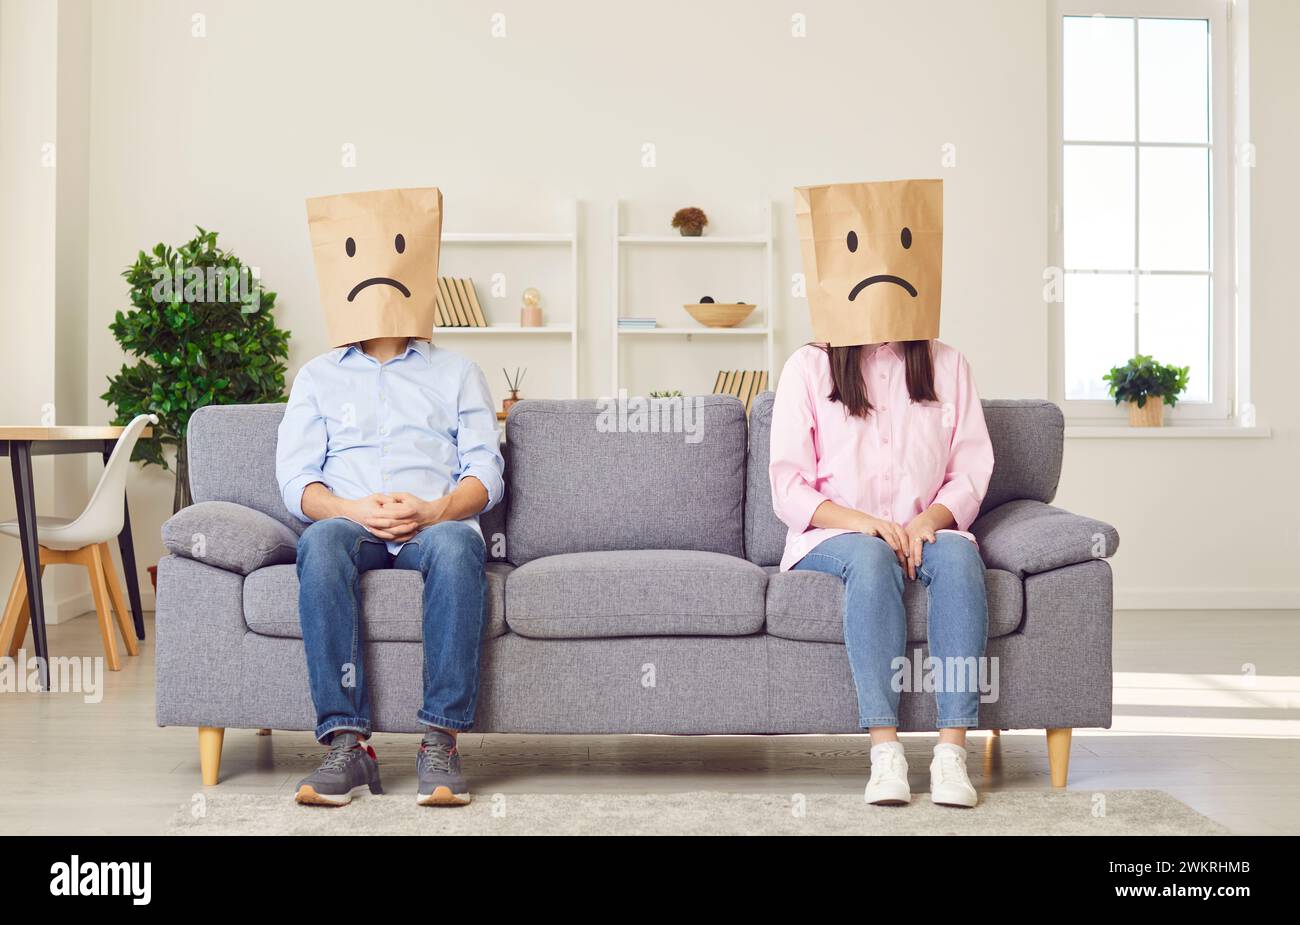 Couple sitting on opposite sides of sofa with paper bags with upset faces ignoring each other. Stock Photo